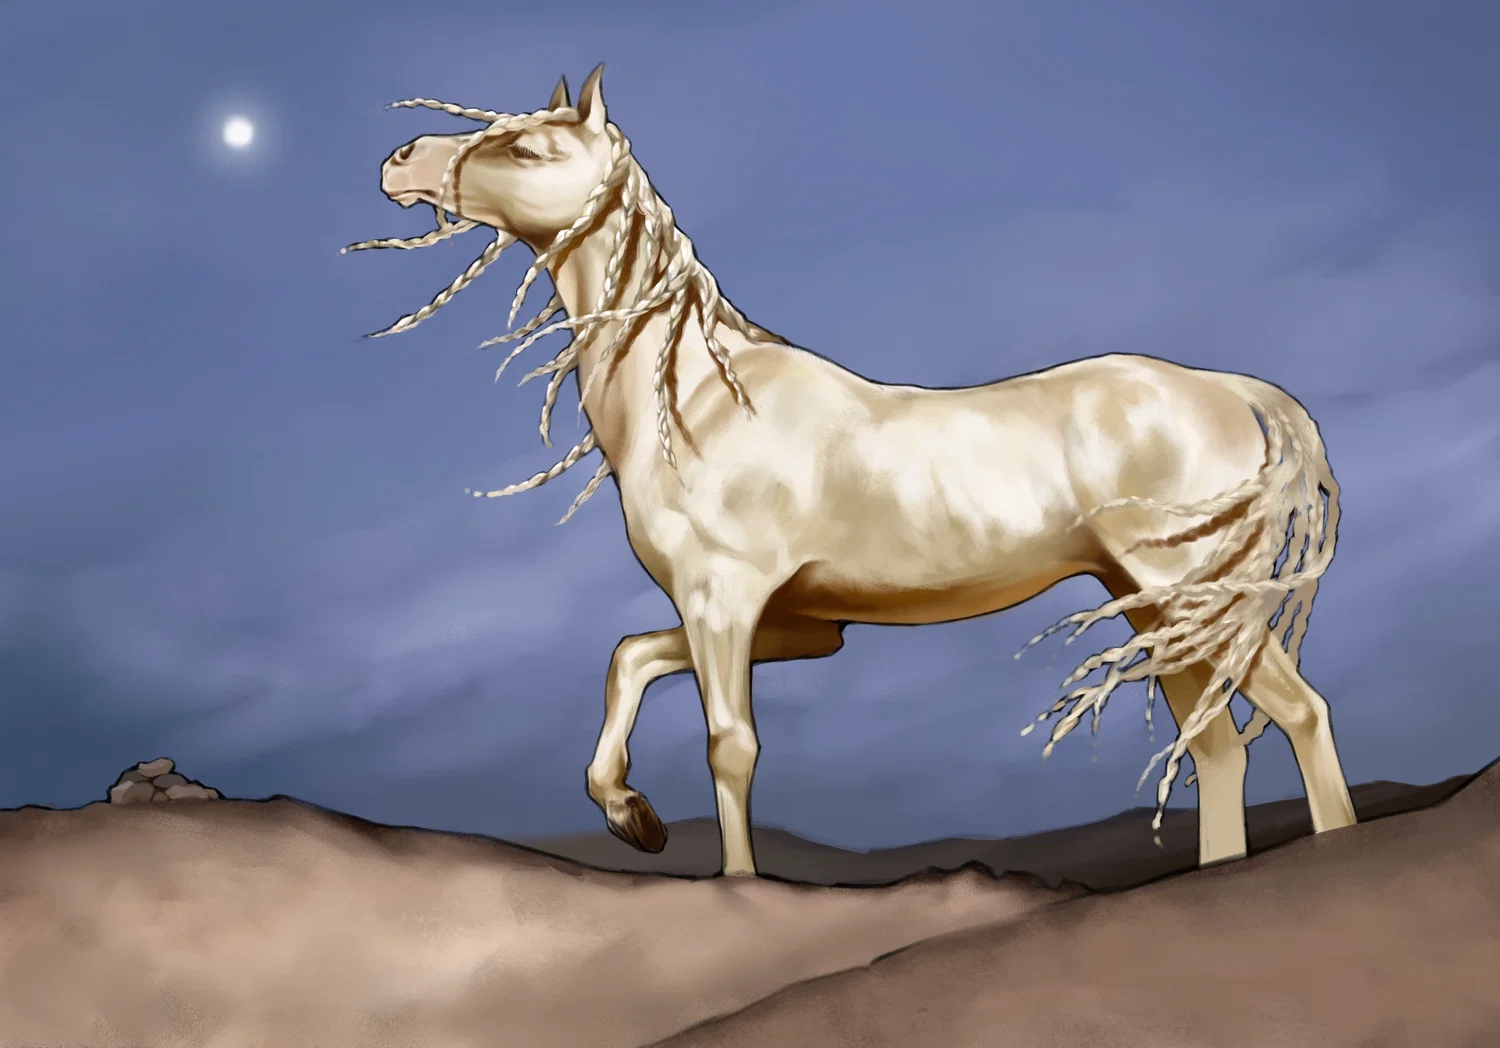 An illustration of my favorite horse breed, the Akhal Teke.